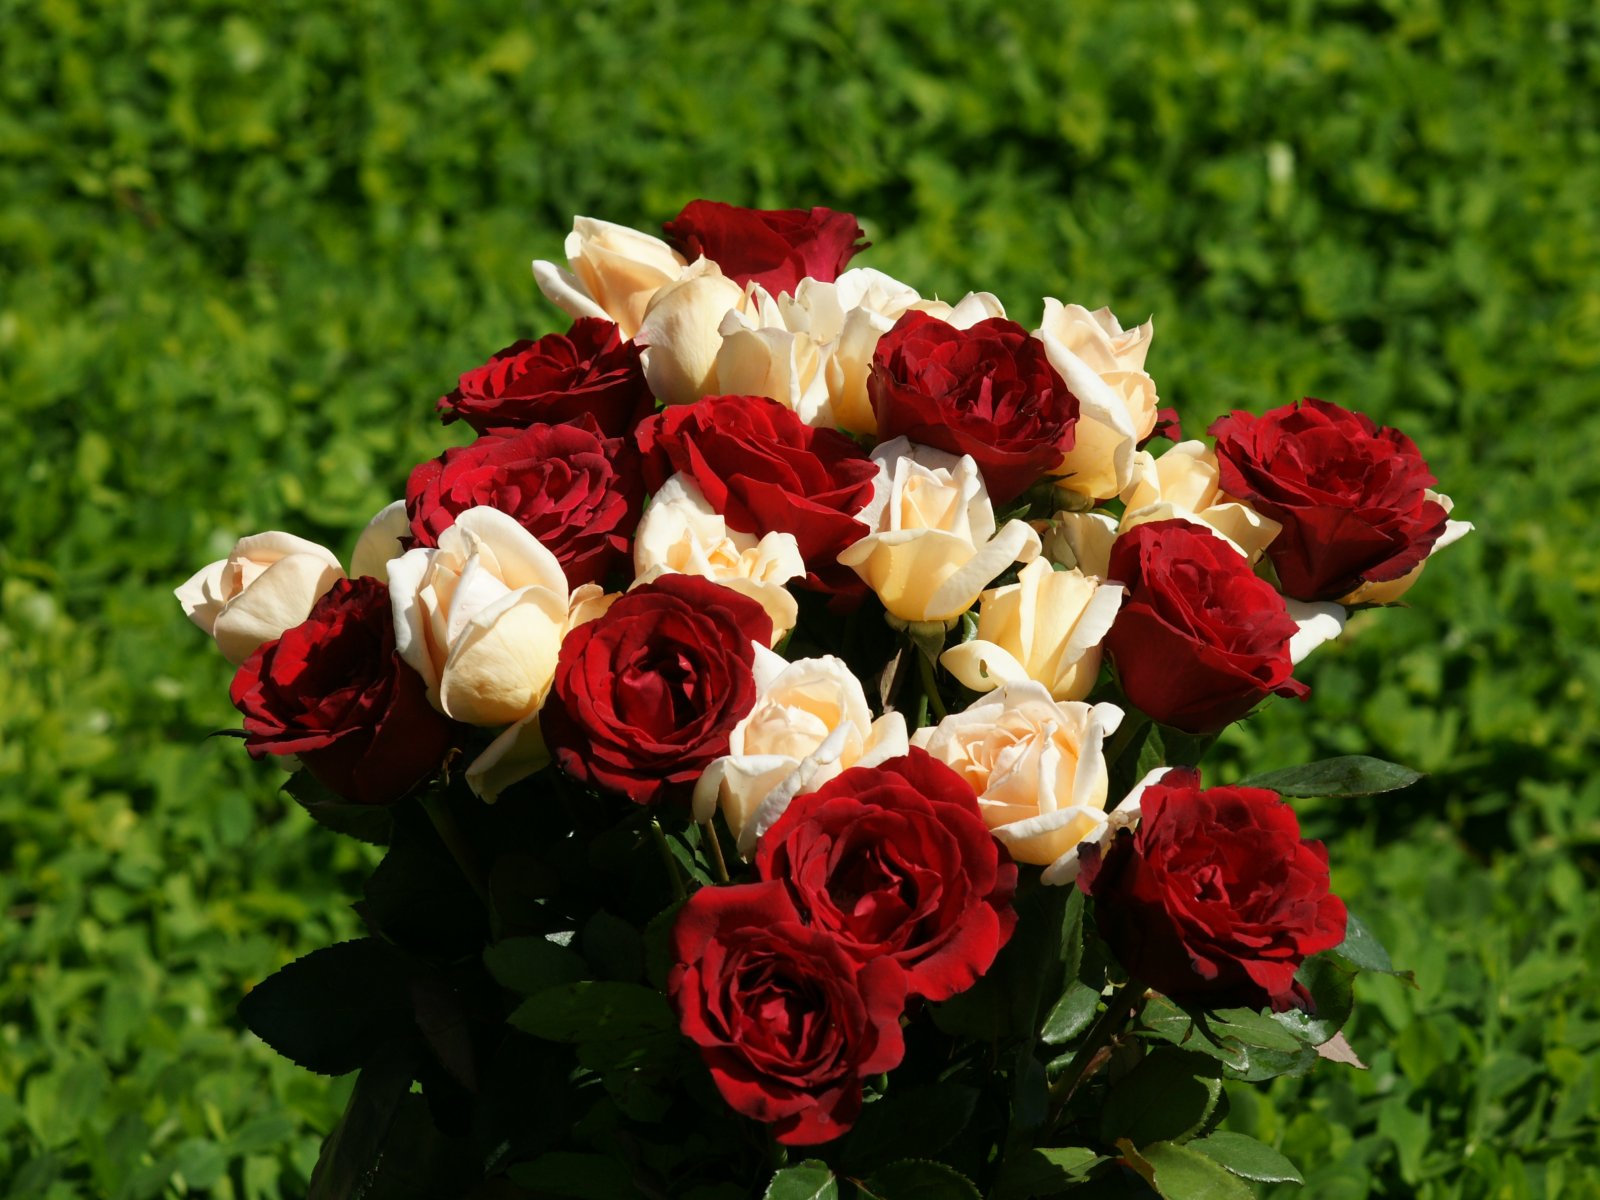  roses wallpapers hd rose wallpaper 21 bundle of red and white roses